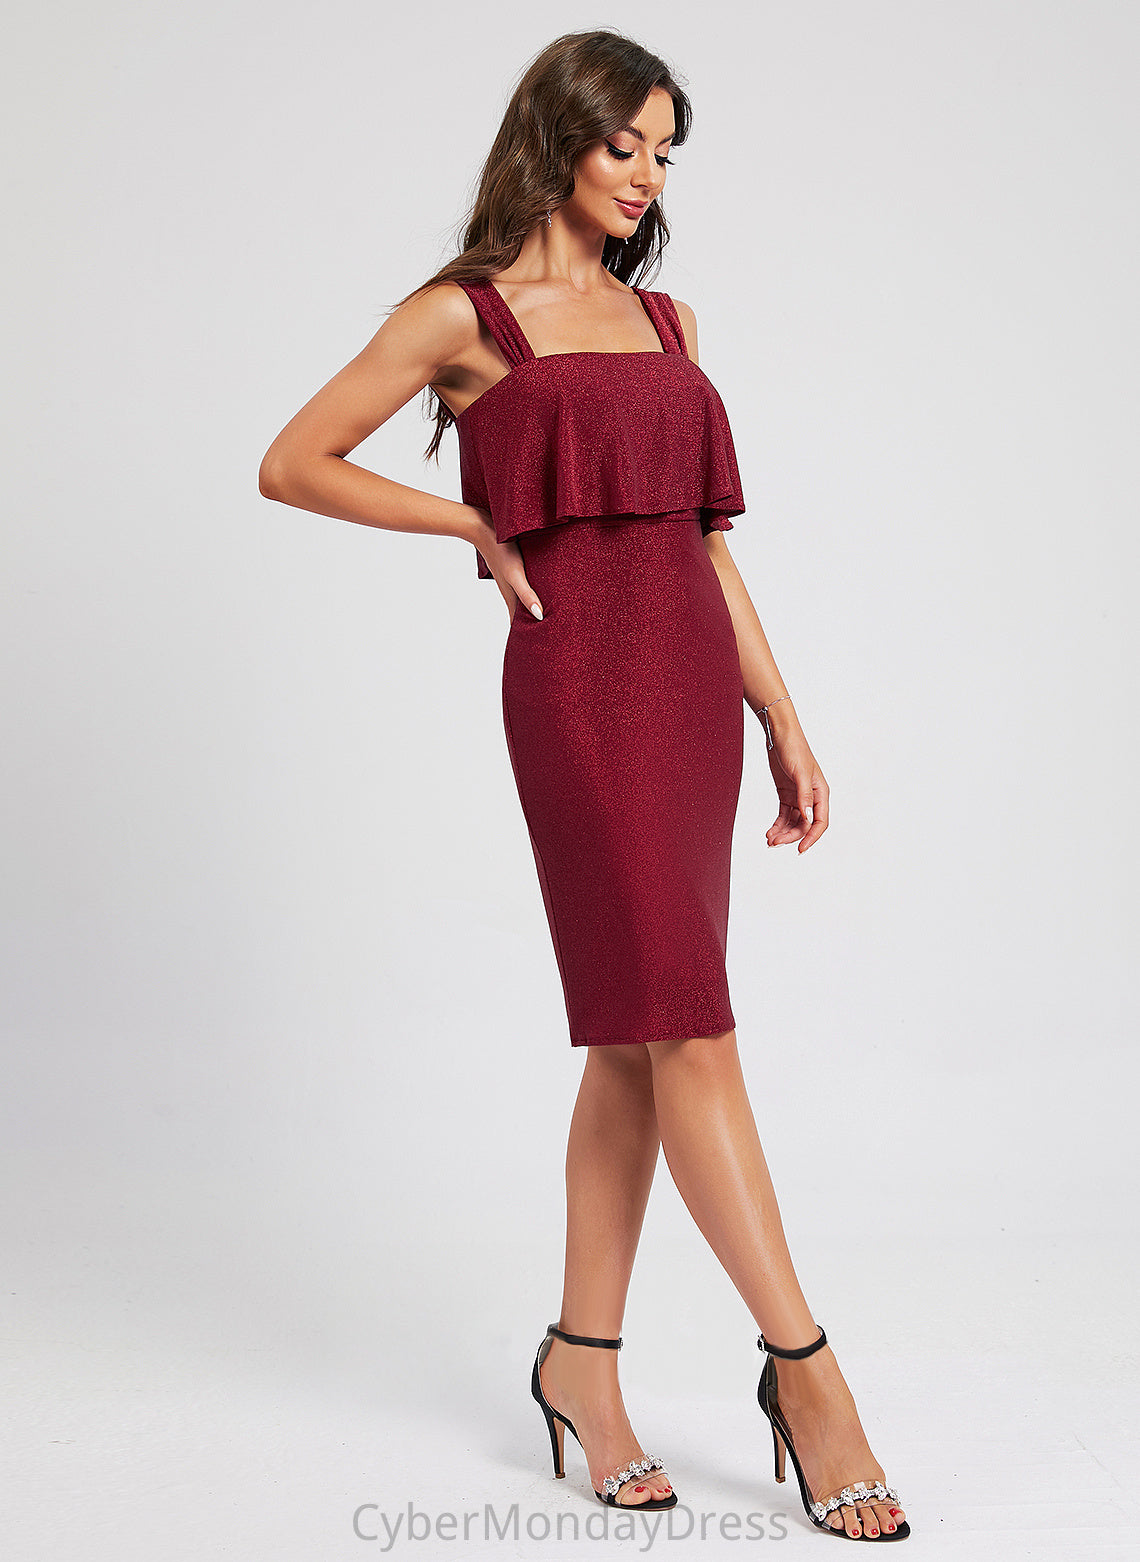 Cocktail Dresses With Knee-Length Sheath/Column Cocktail Polyester Lesly Ruffle Neckline Square Dress